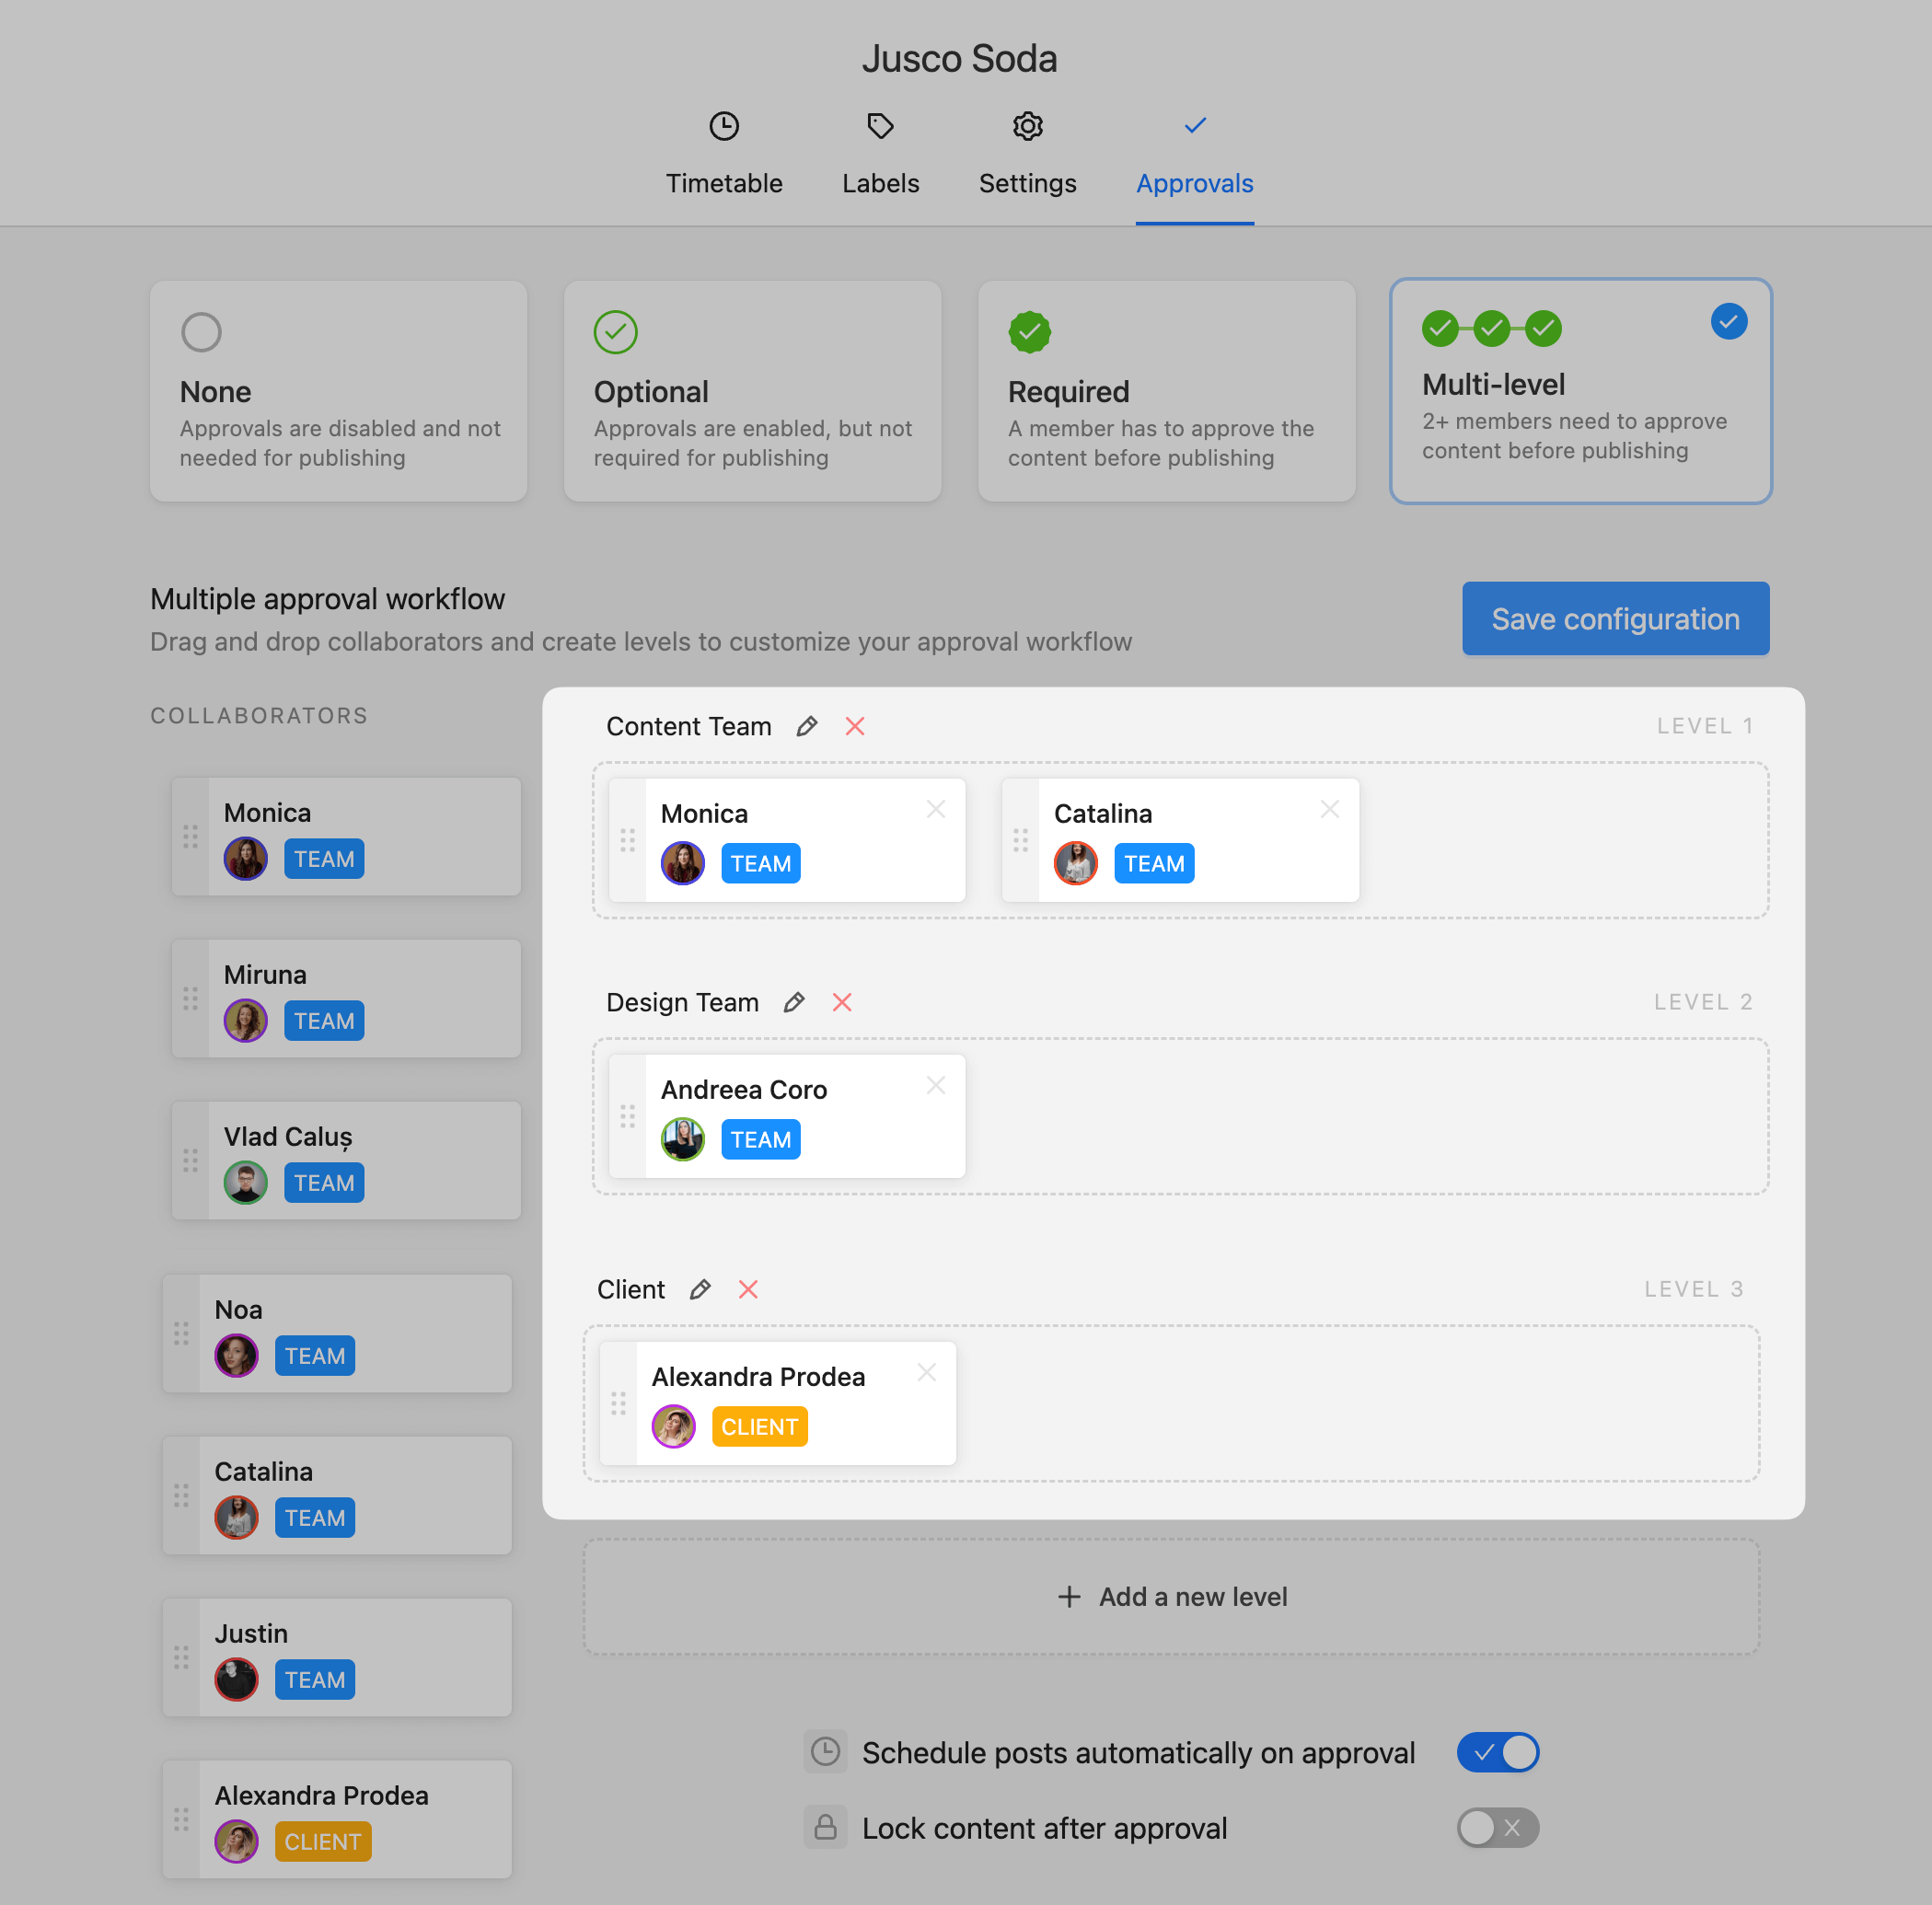 Approval workflow settings with 3 levels of approval for Content Team, Design Team, and Client.